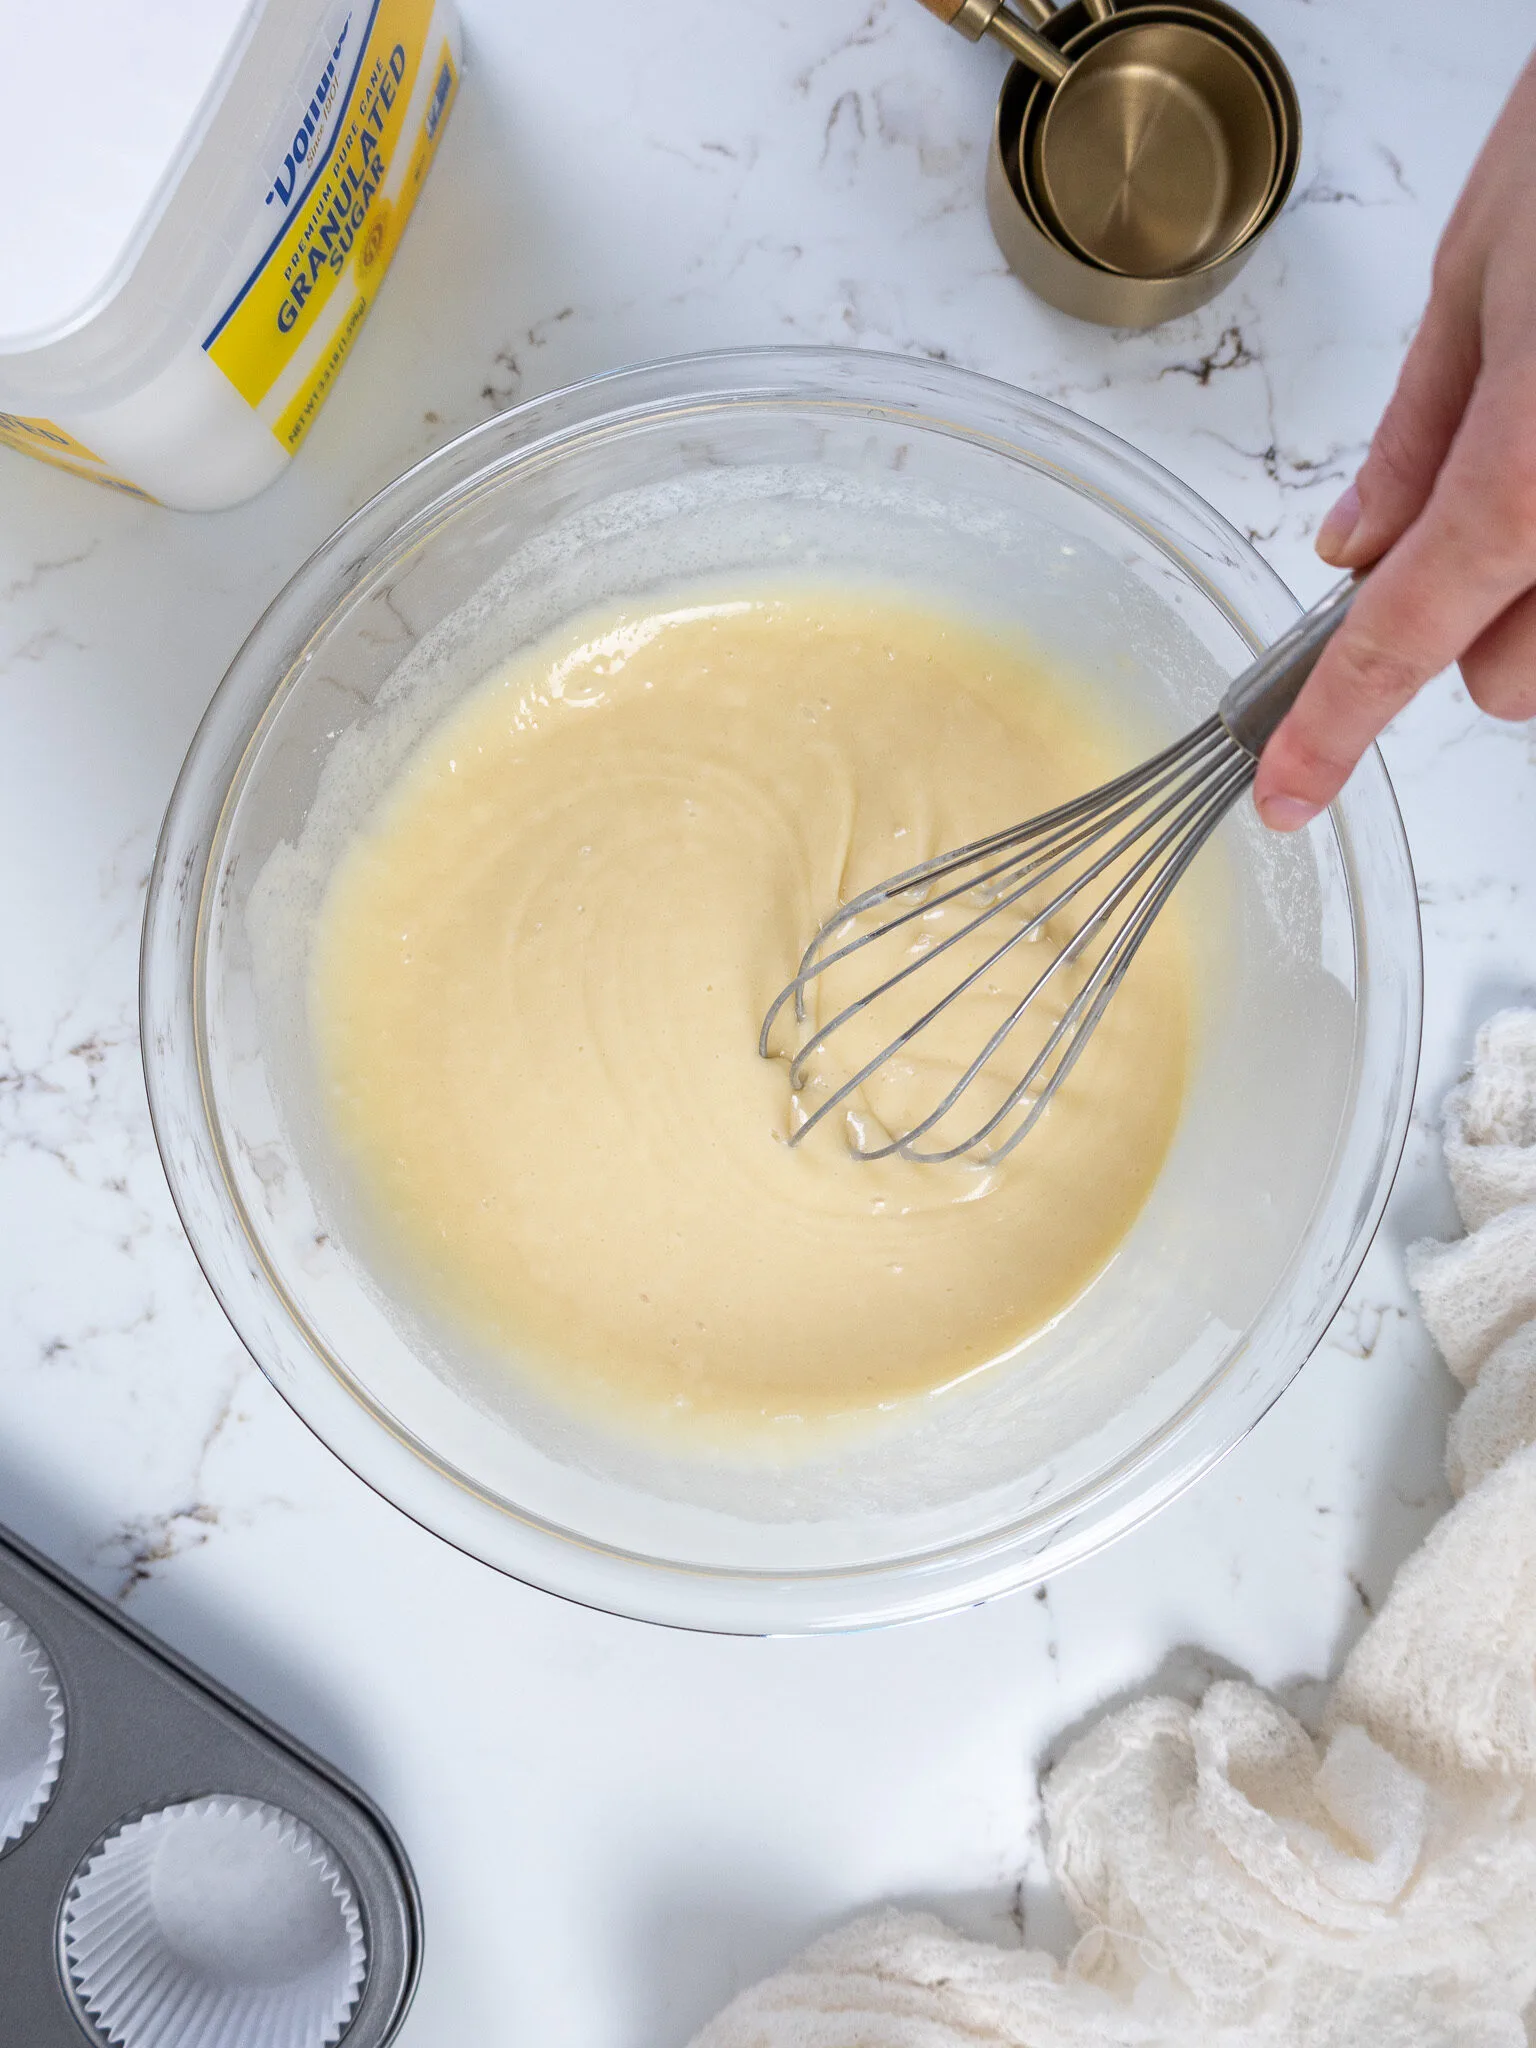 image of vanilla cake batter being whisked together in a glass bowl